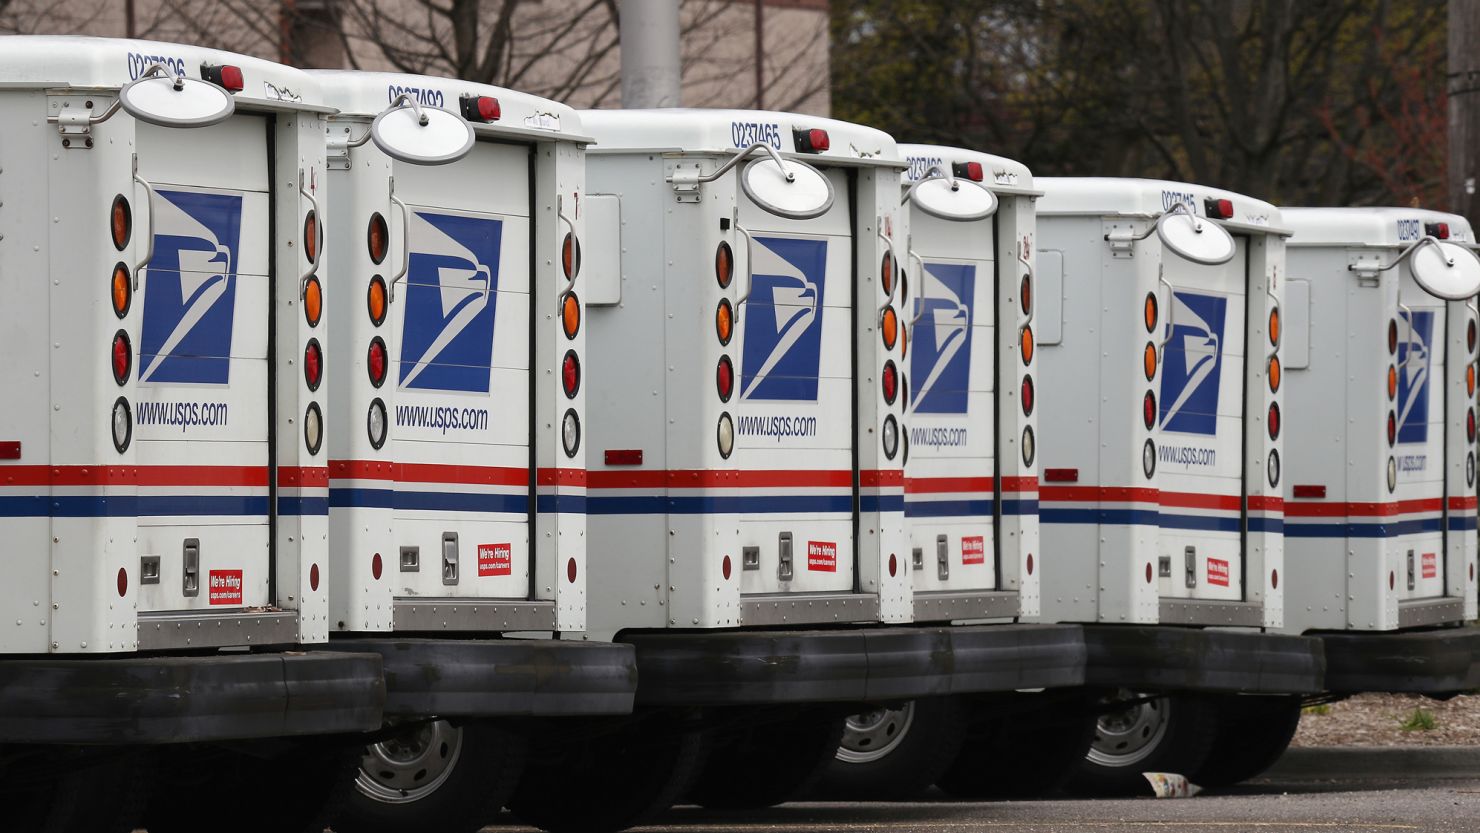 USPS reform act 2022: What the new overhaul law means for you